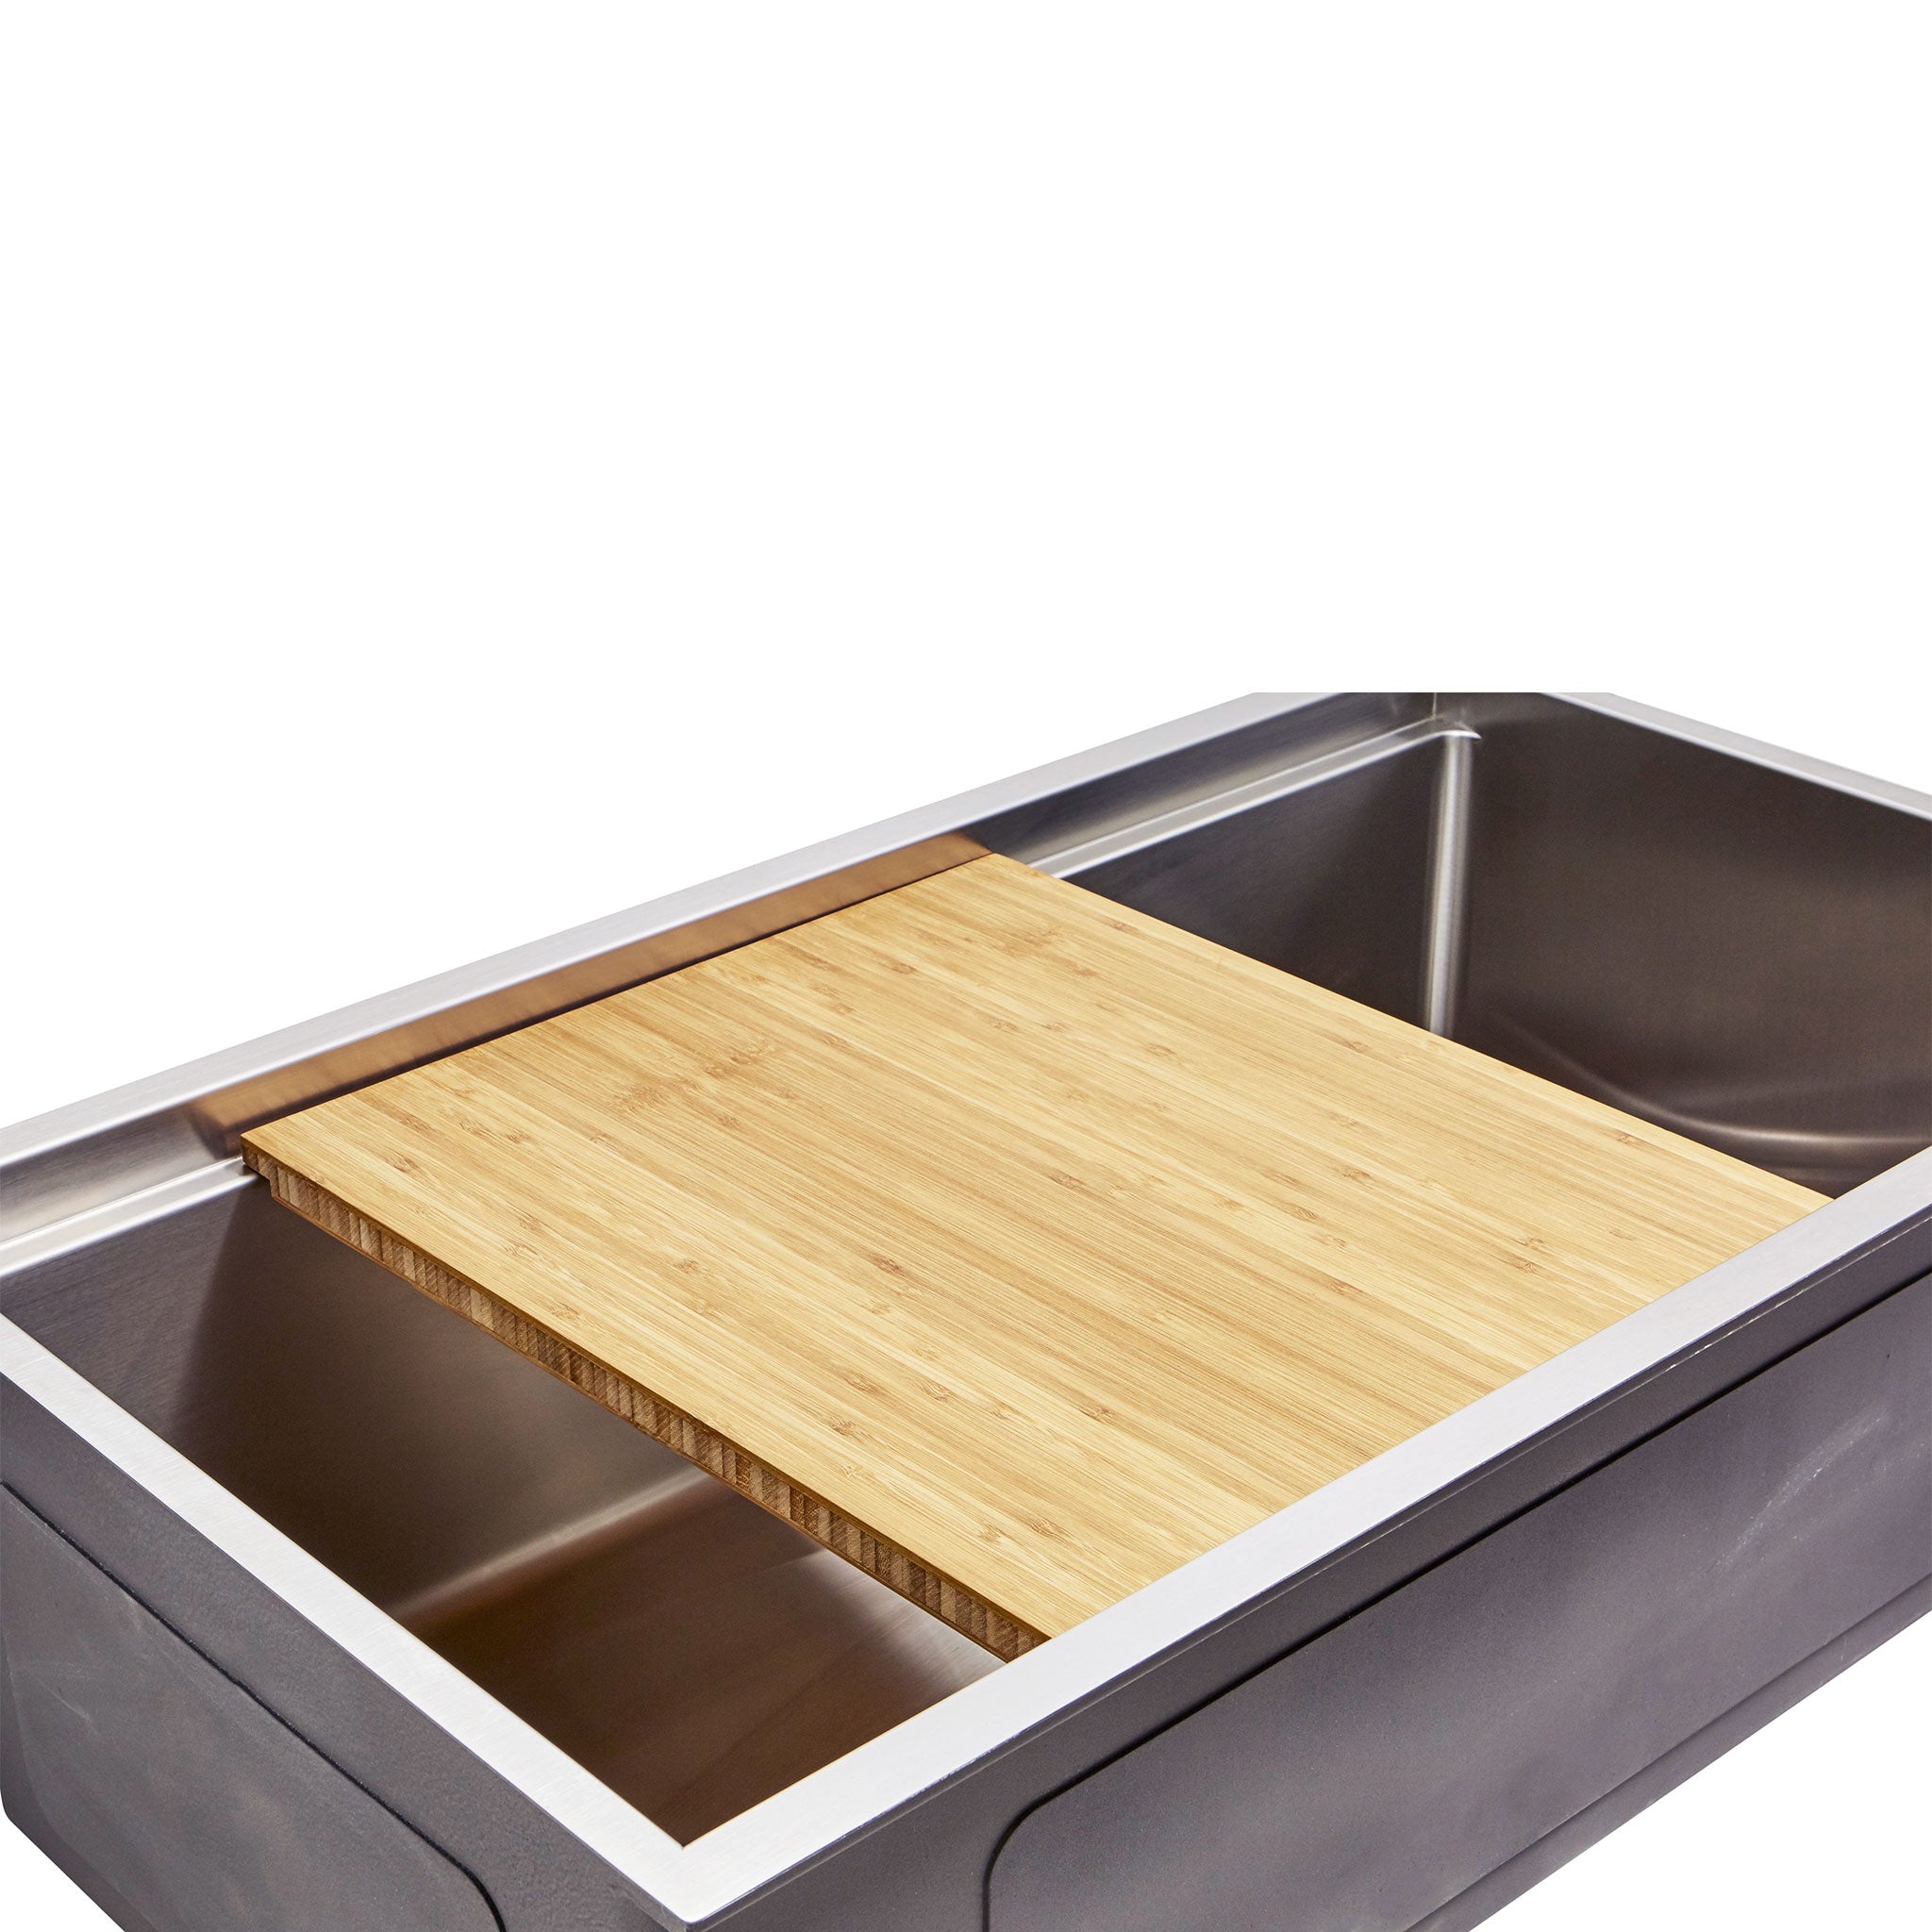 Classic Sink Accessory - 15 Bamboo Cutting Board with Silicone Coland